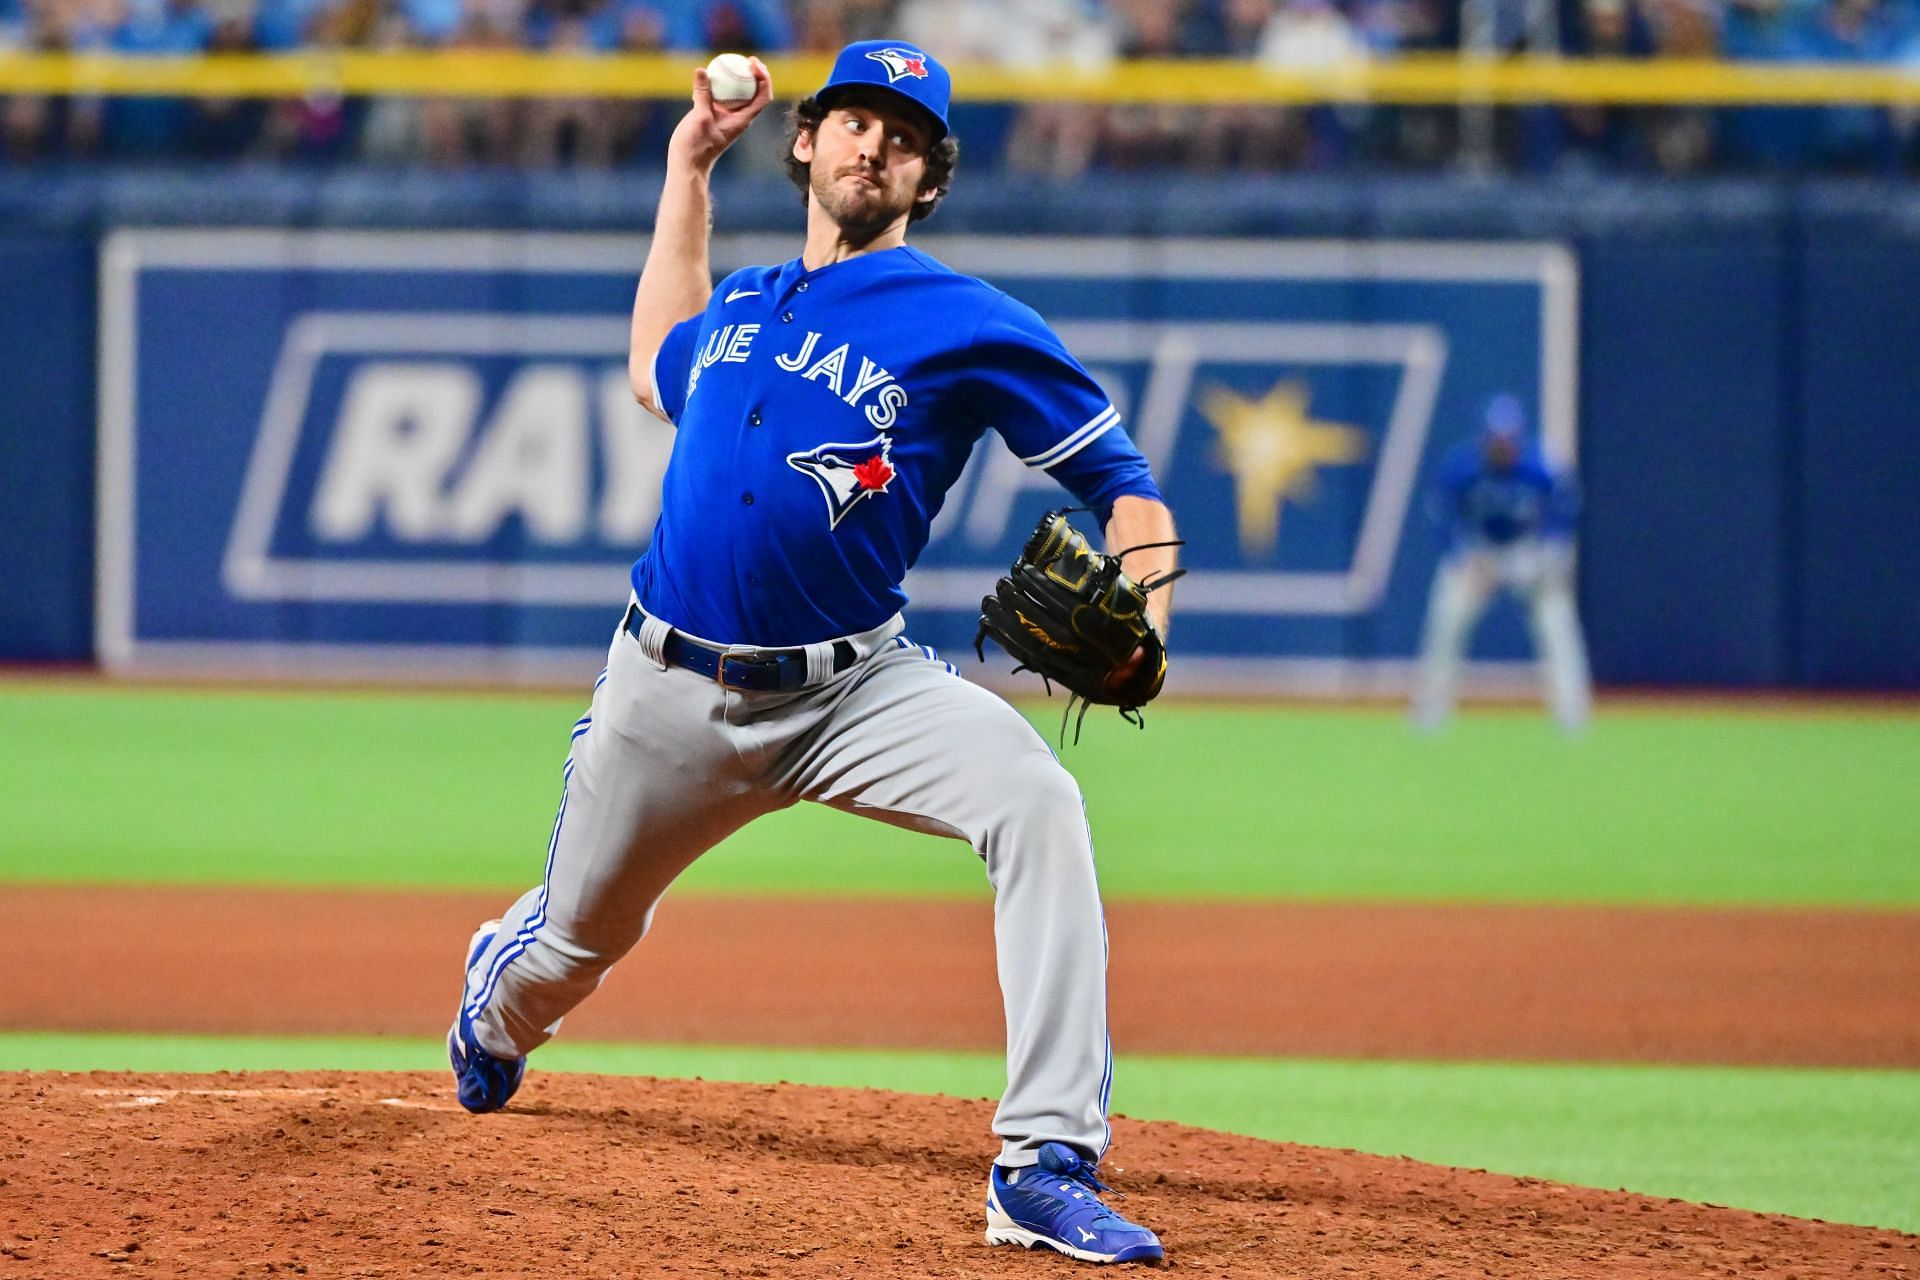 Blue Jays Hometown Star Jordan Romano On What It Means To Play For